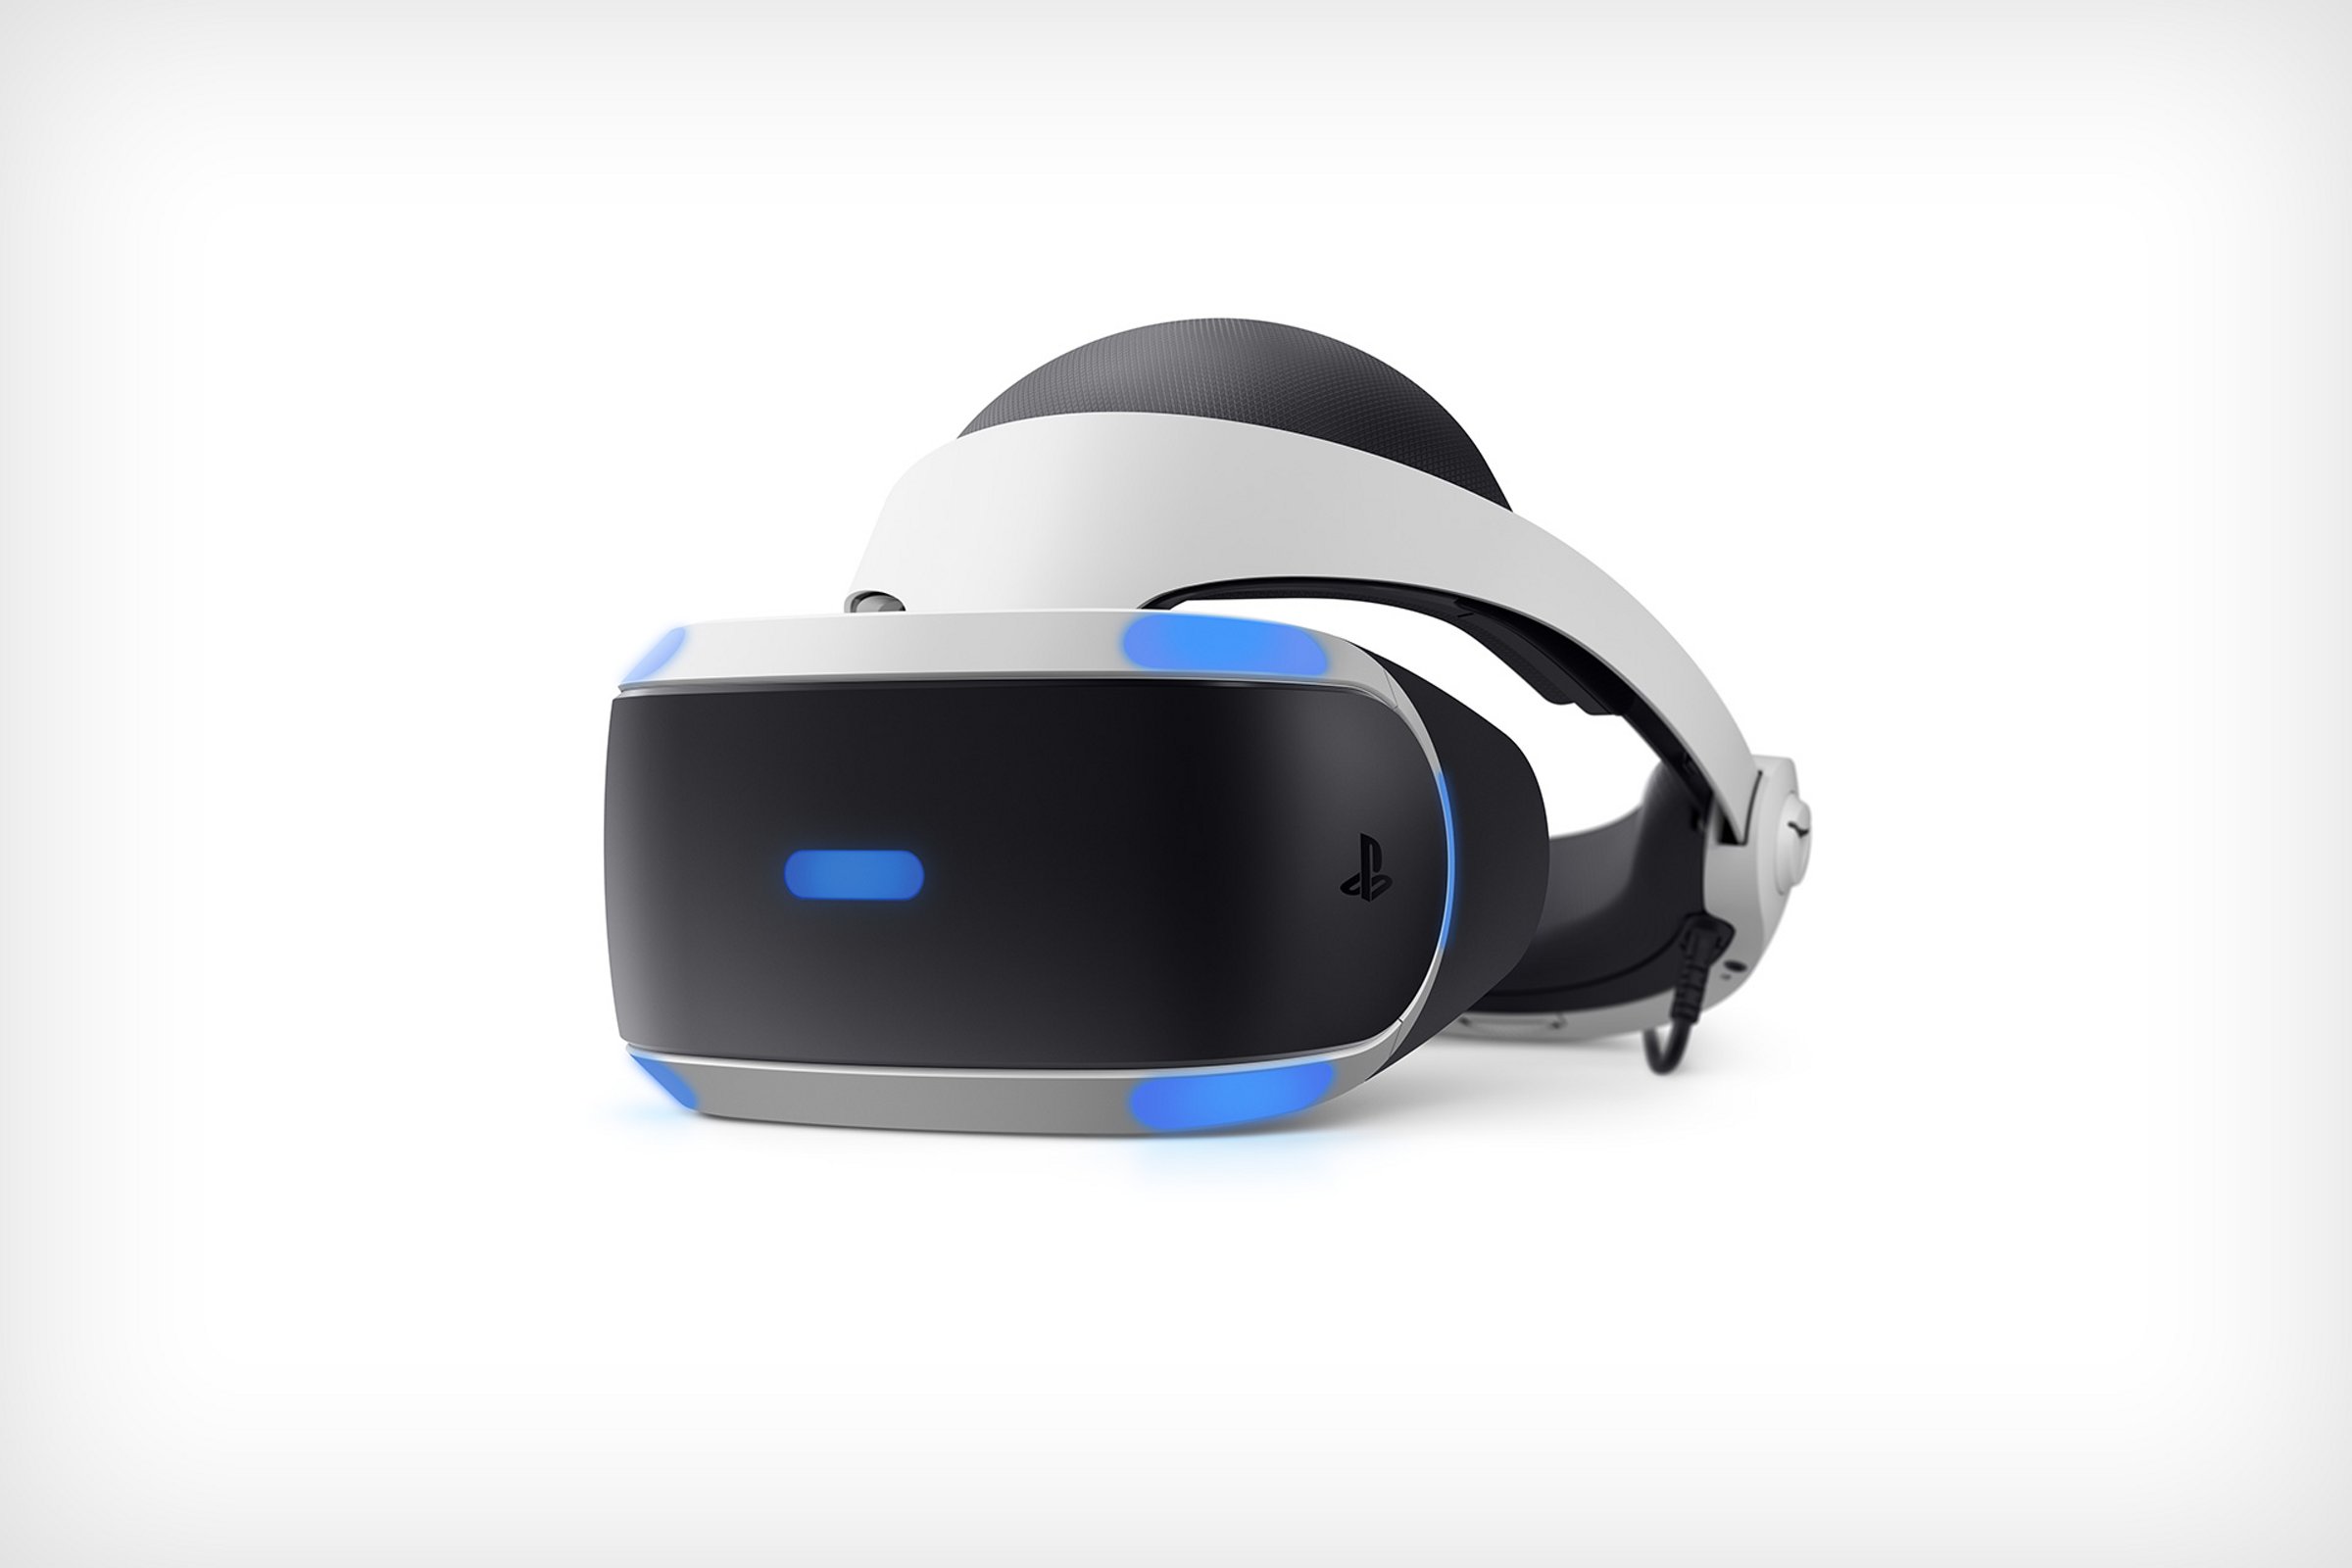 The PS VR headset is illuminated